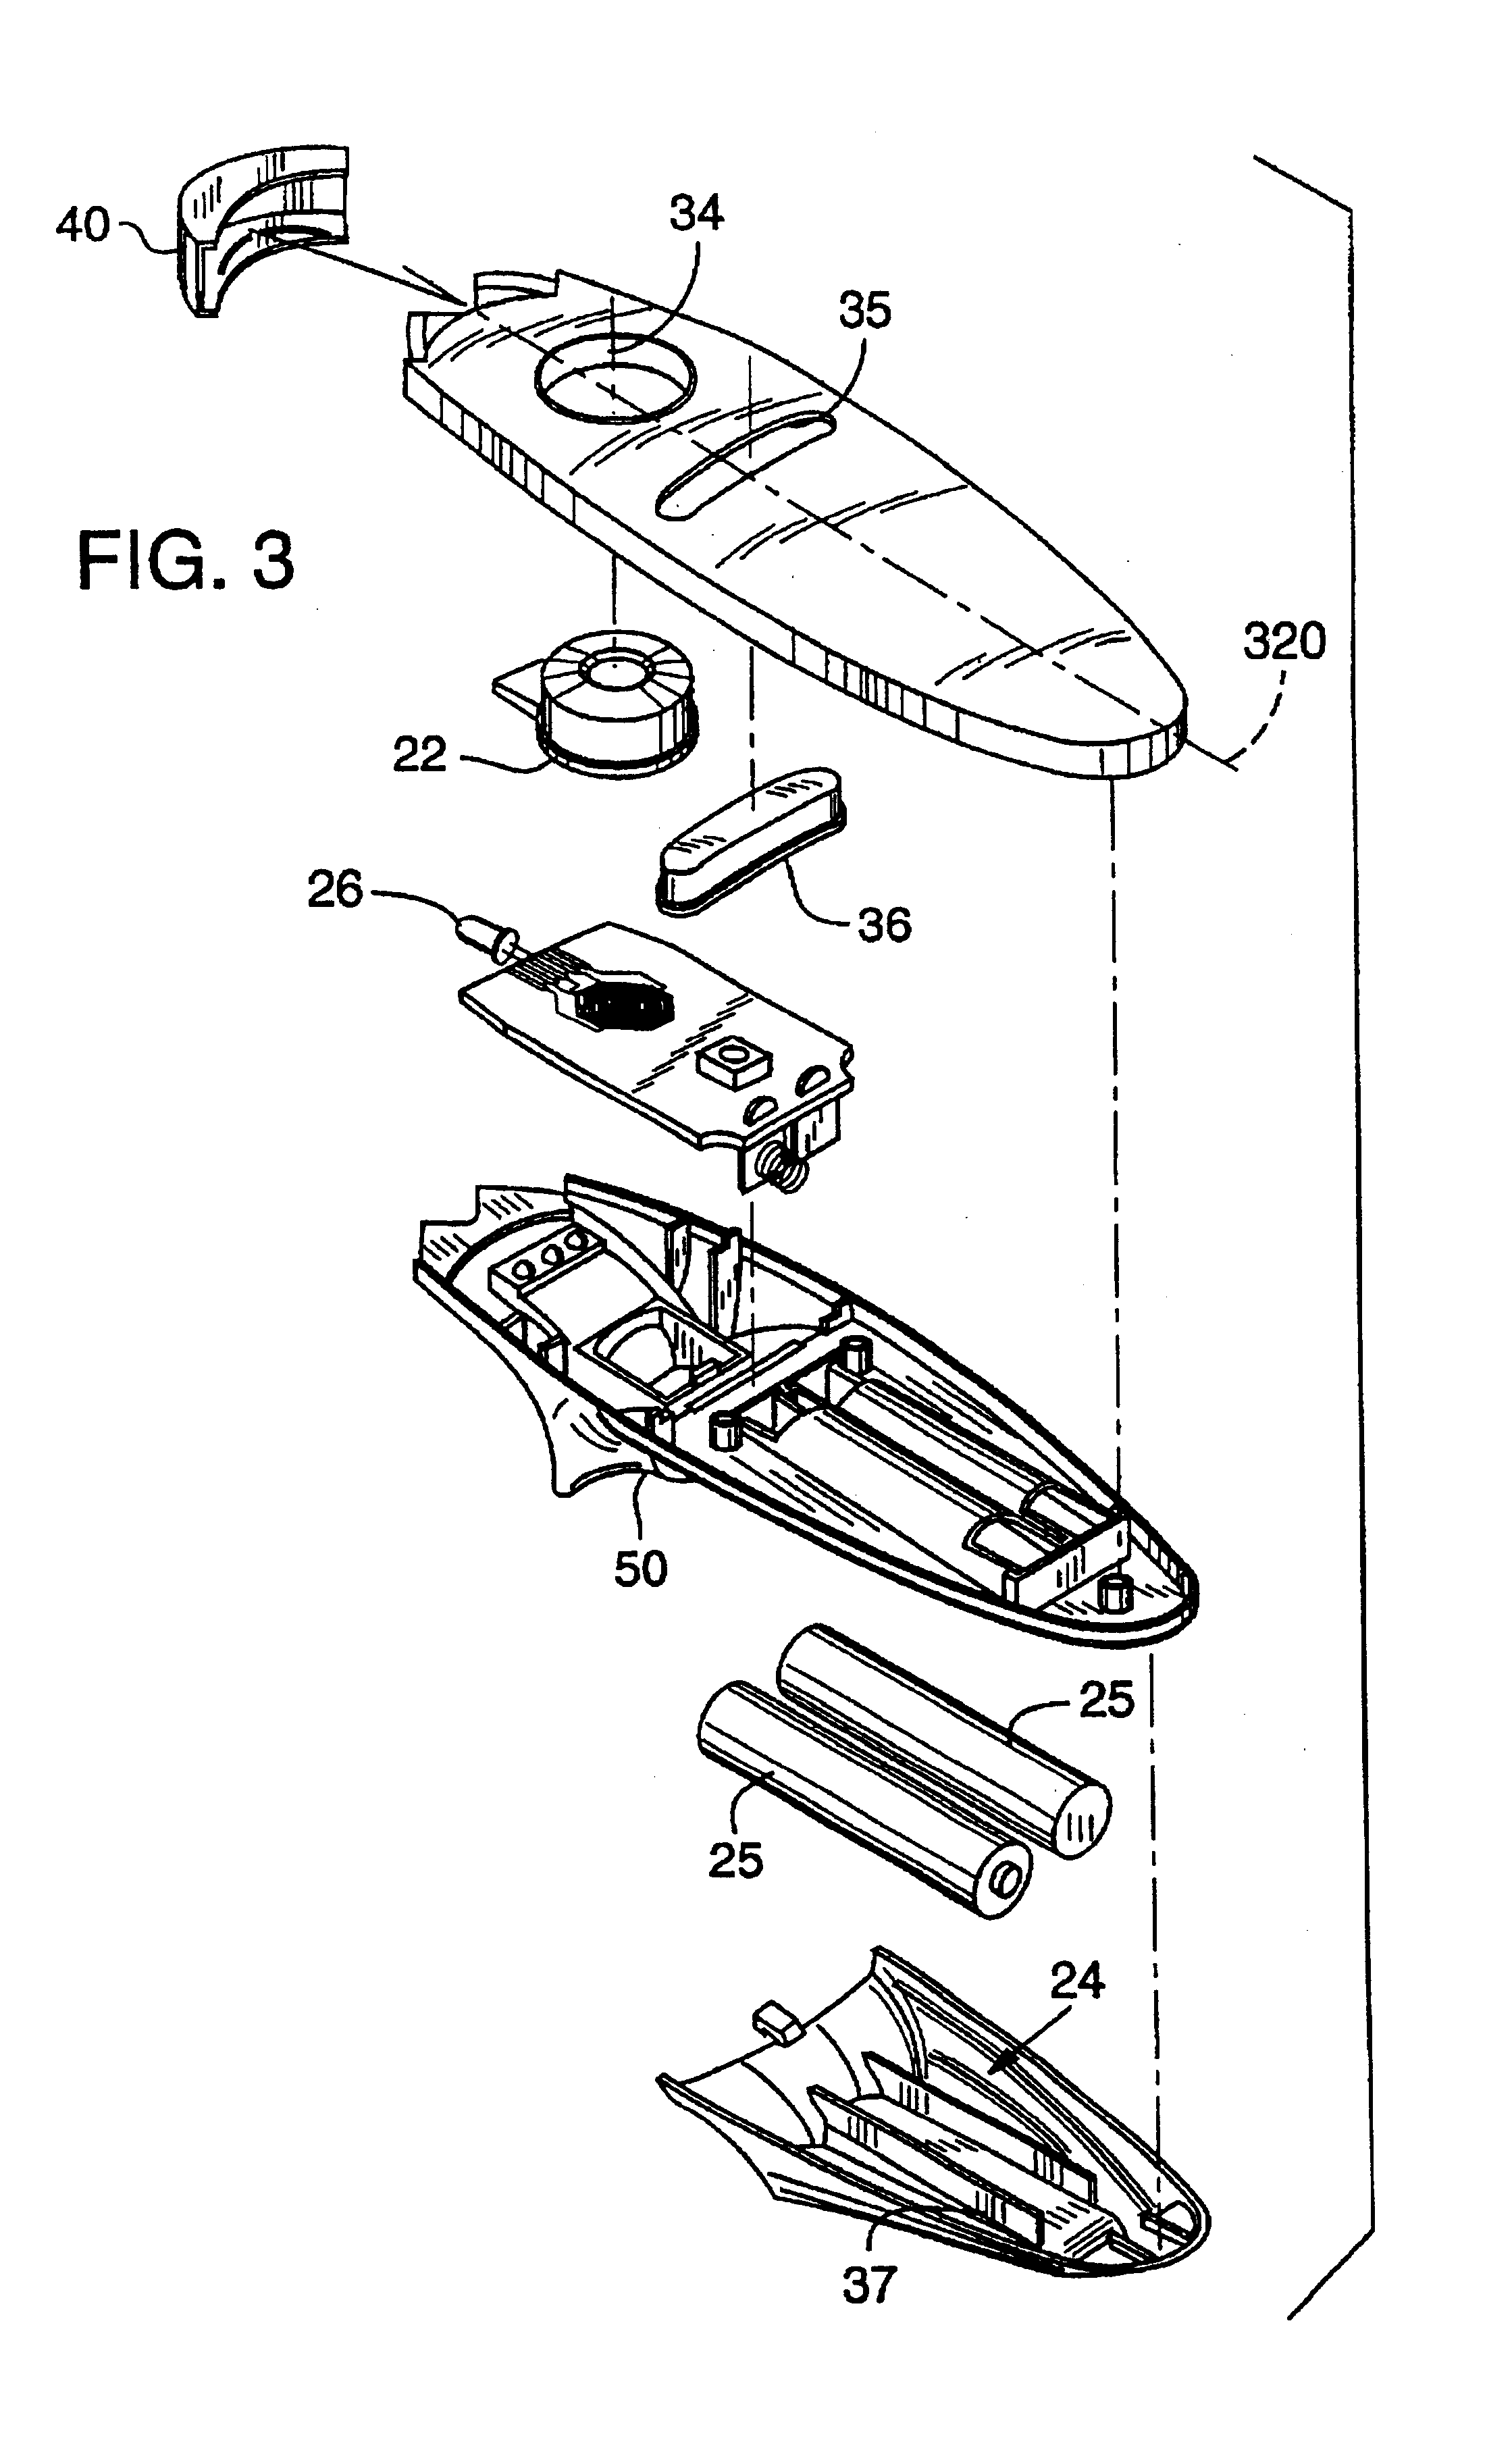 Trigger operated electronic device